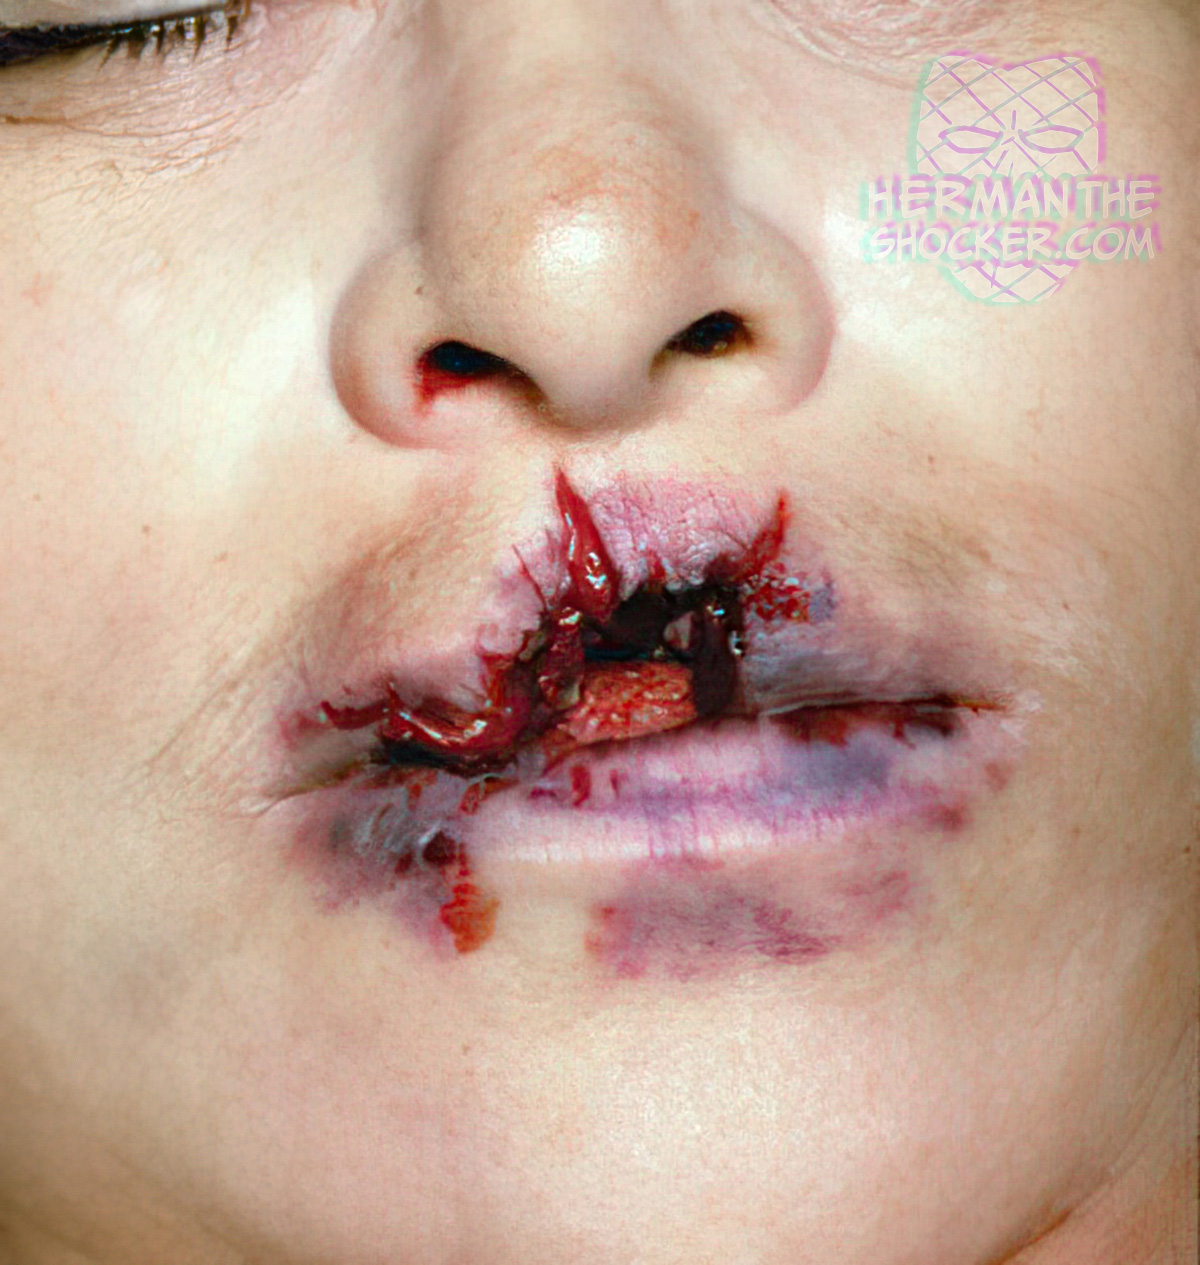 Stellate entrance wound on the lip